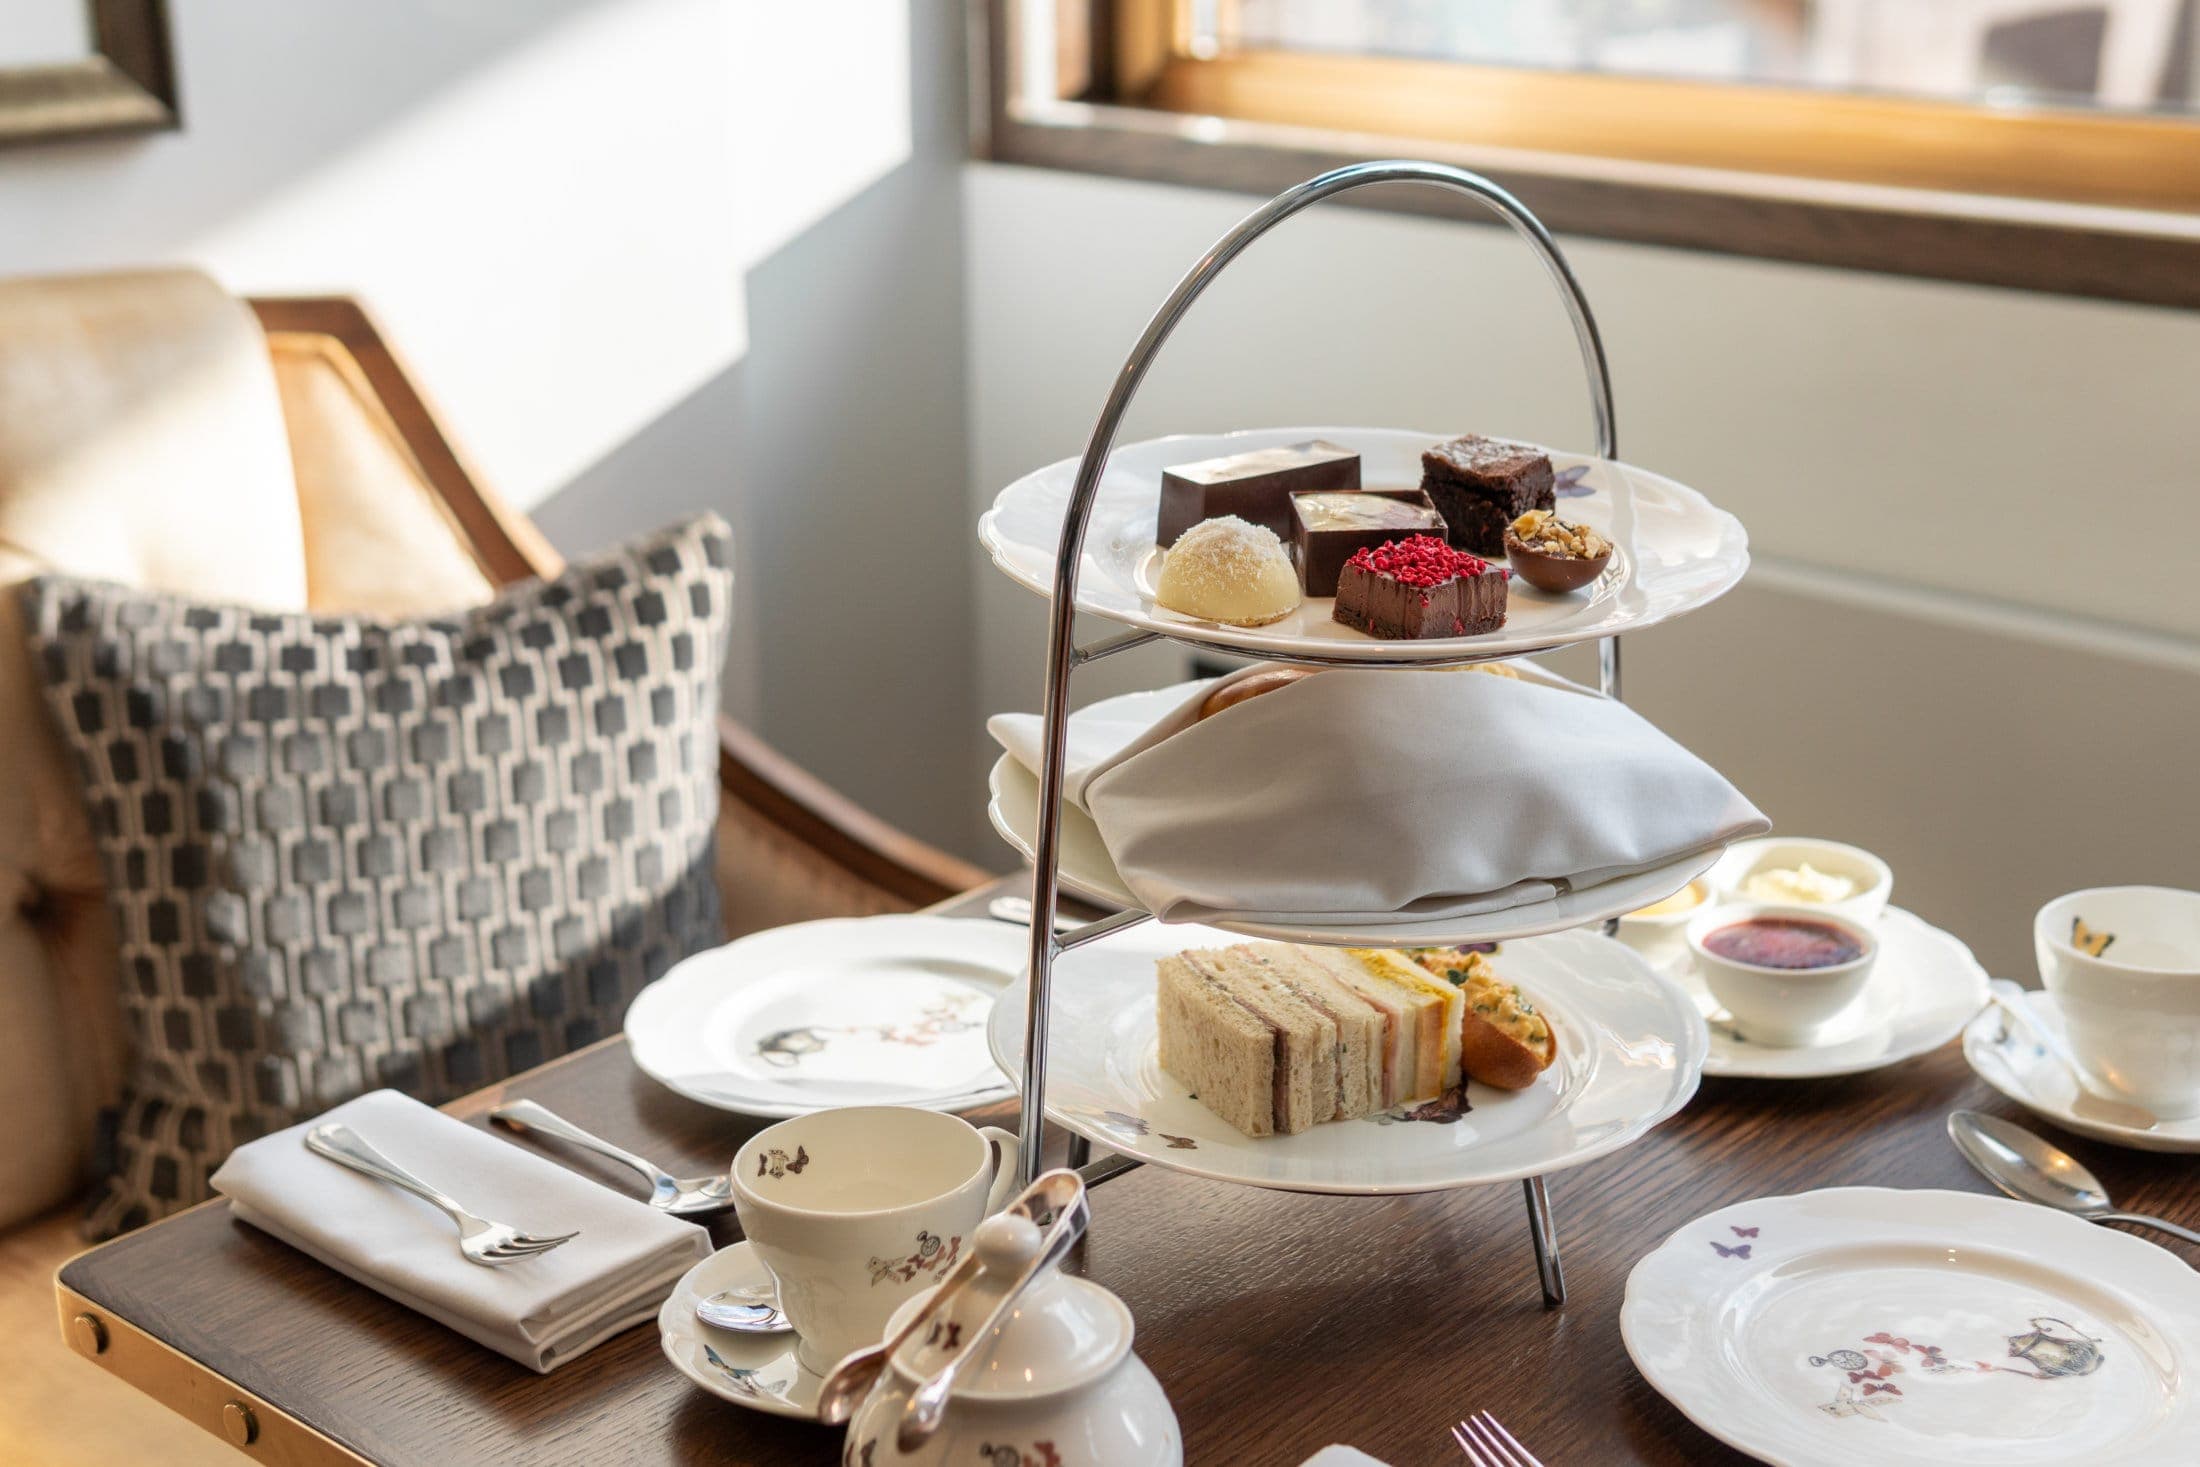 Afternoon Tea at The Athenaeum